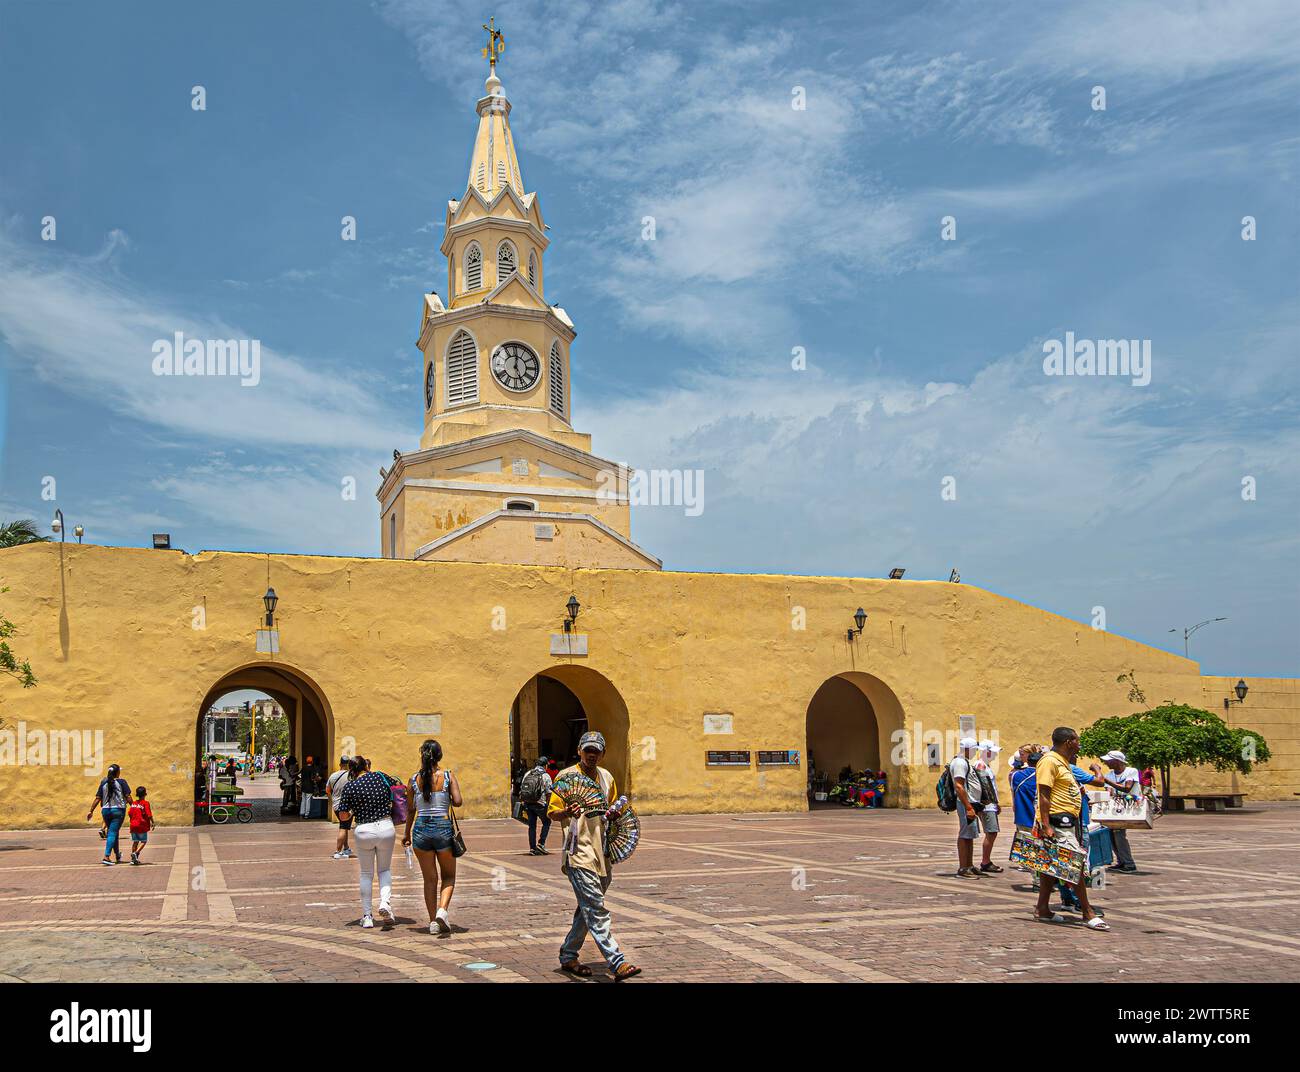 Cartagena, Colombia - July 25, 2023: Torre del Reloj and gate in remaining part of ramparts into old town center seen from Plaza de los Coches under b Stock Photo